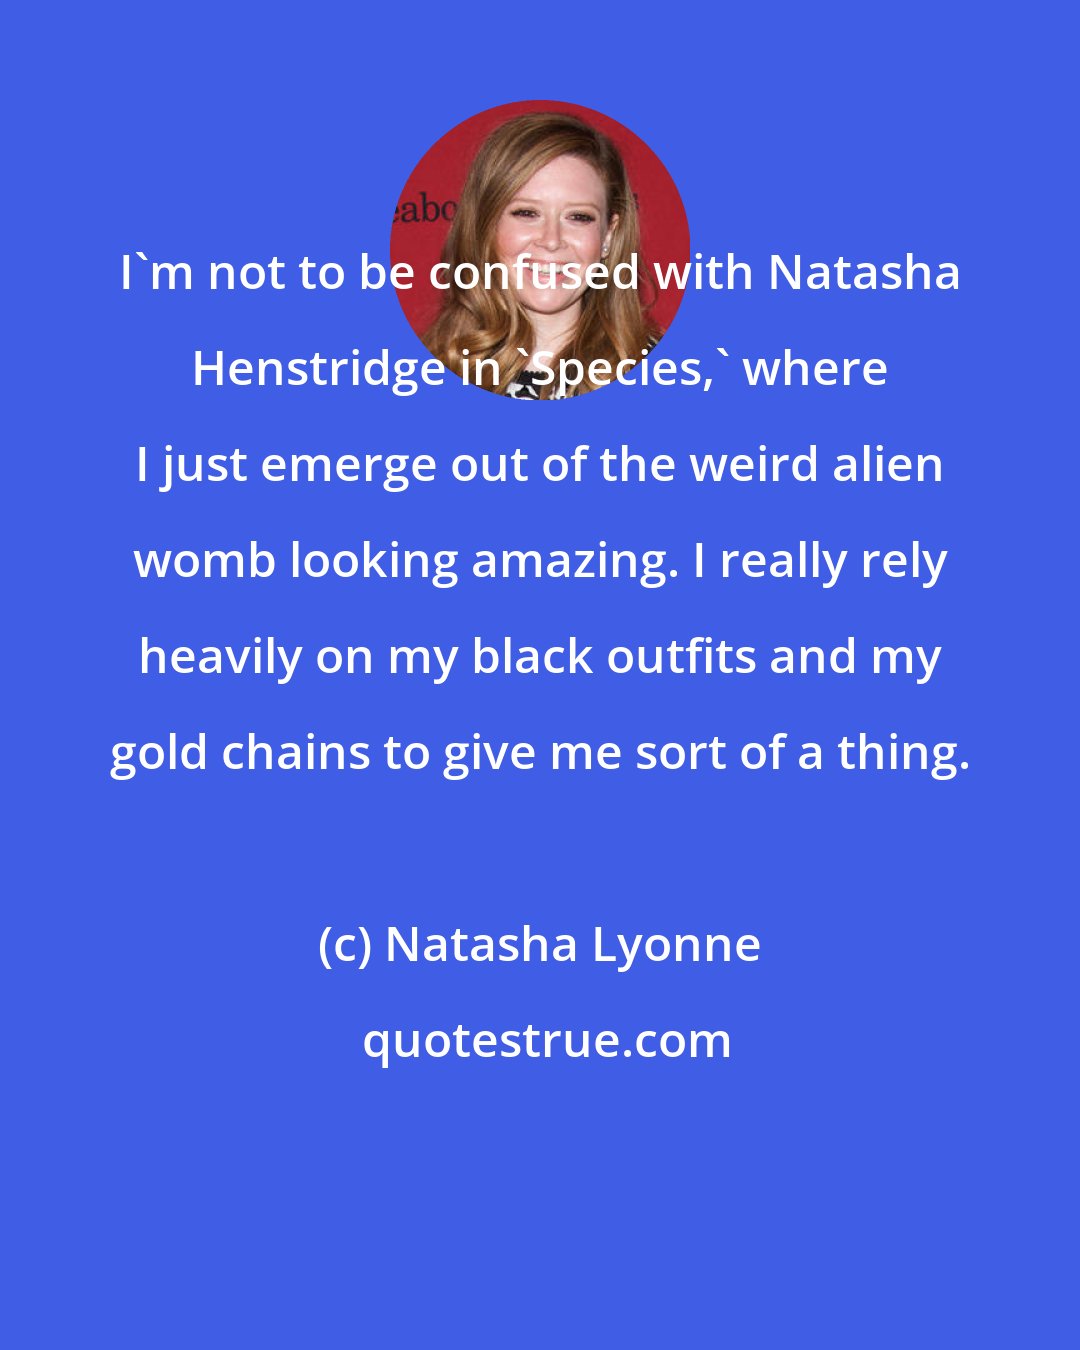 Natasha Lyonne: I'm not to be confused with Natasha Henstridge in 'Species,' where I just emerge out of the weird alien womb looking amazing. I really rely heavily on my black outfits and my gold chains to give me sort of a thing.